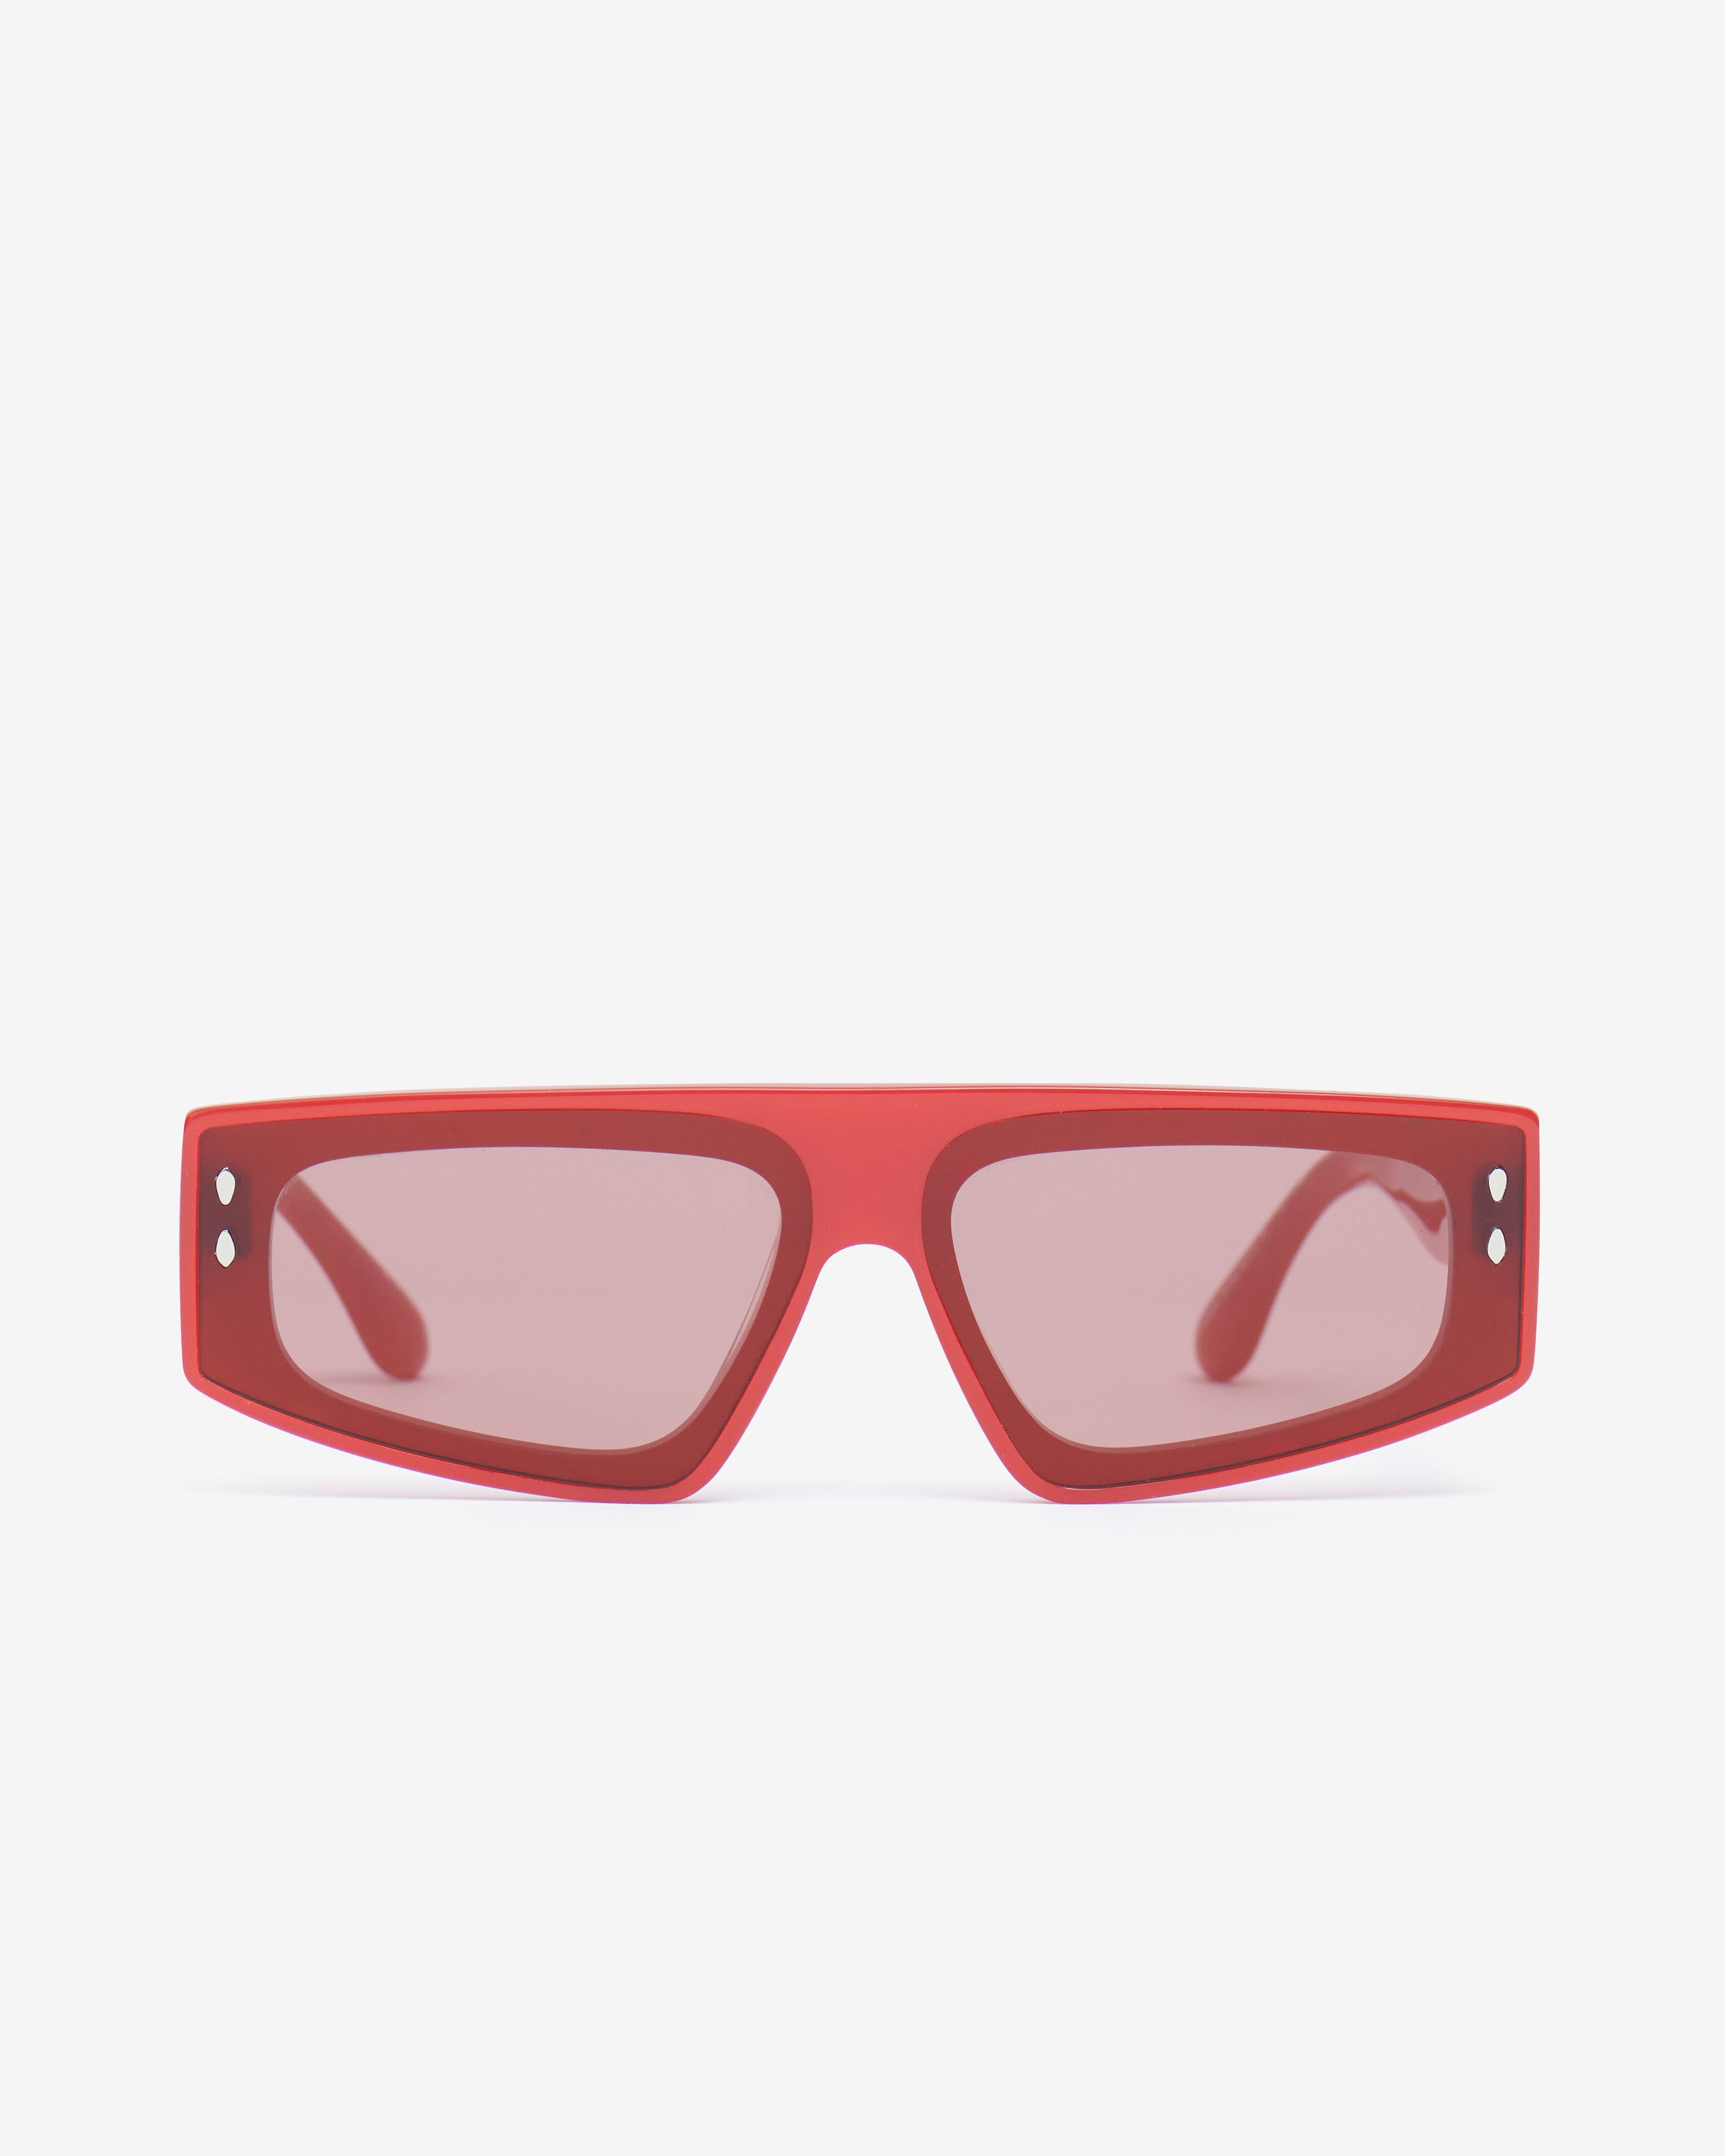 Sonnenbrille zoomy Woman Pearled red-burgundy 2